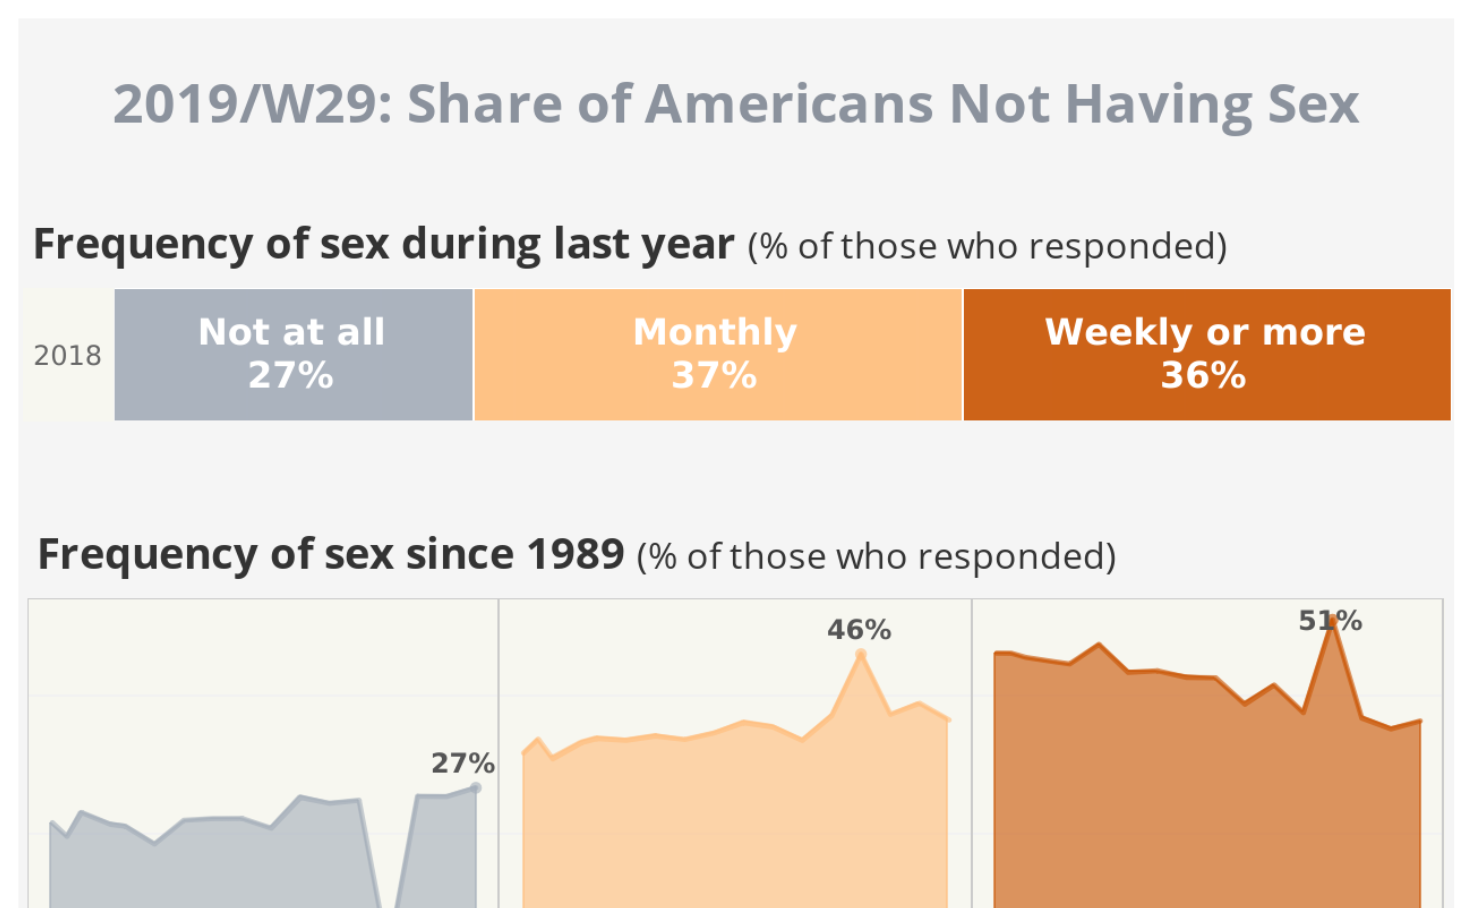 Mm 2019w29 Share Of Americans Not Having Sex Alina Cros Tableau Public 2114